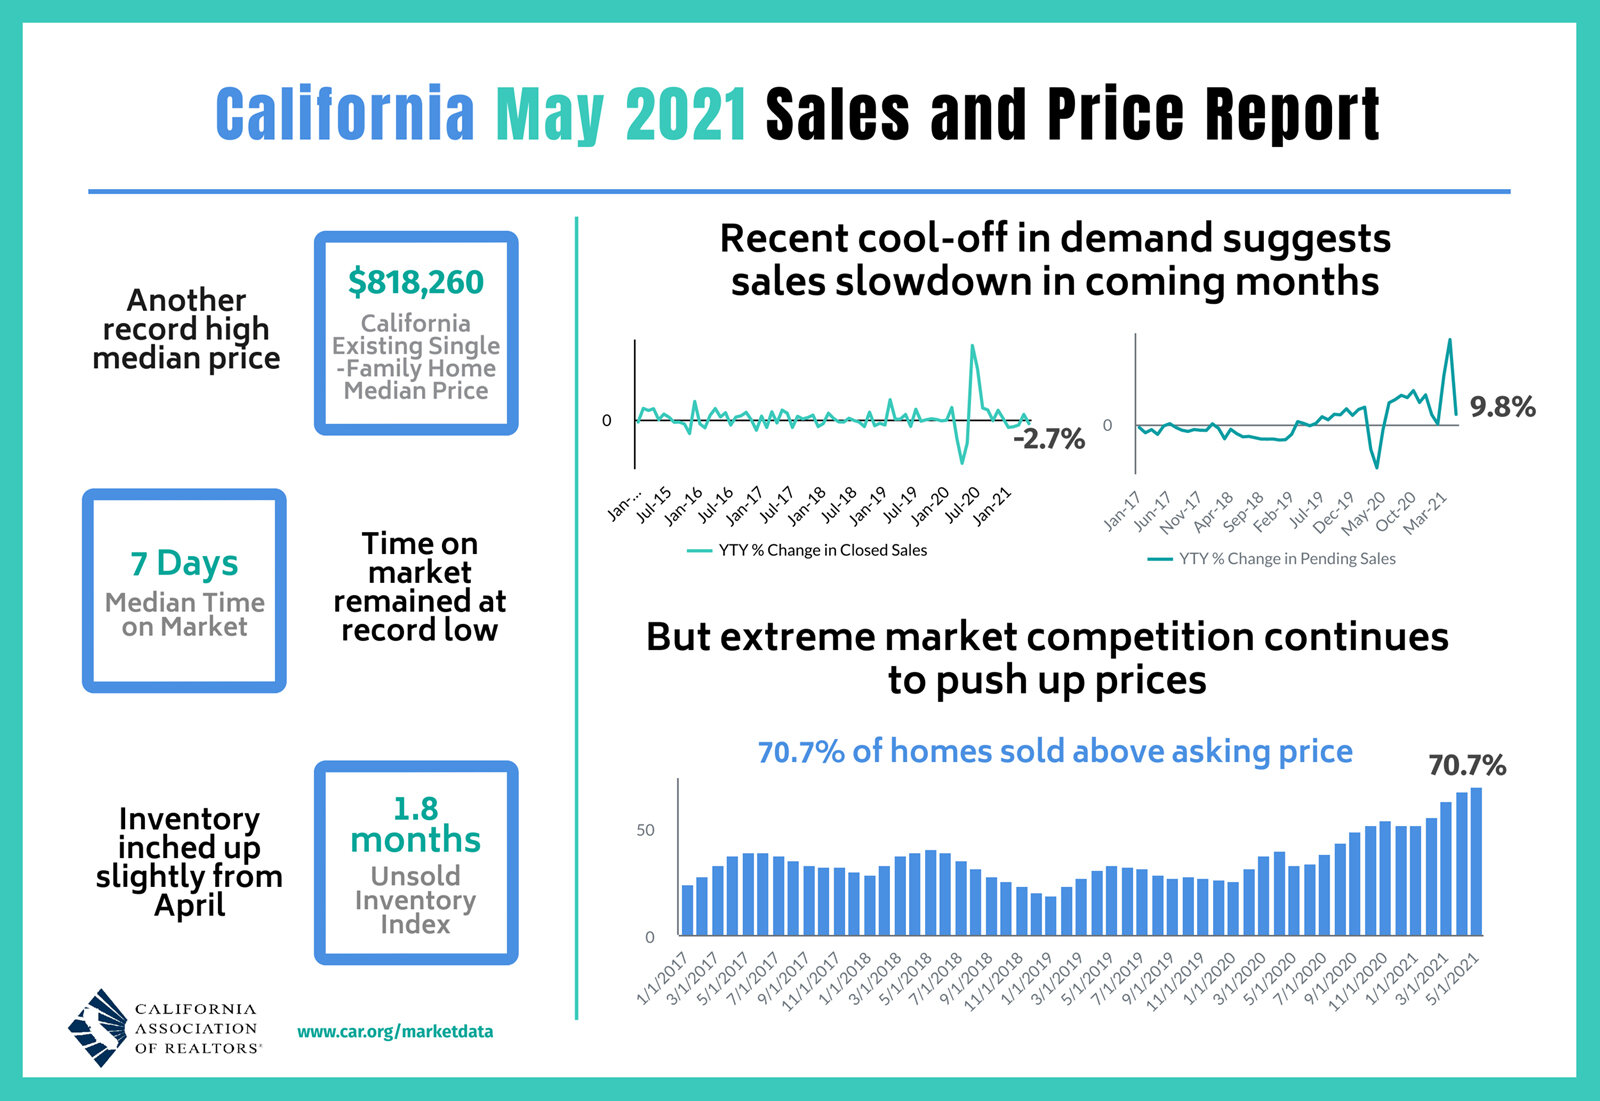 https://www.worldpropertyjournal.com/news-assets/California-home-sales-data-for-May-2021.jpg